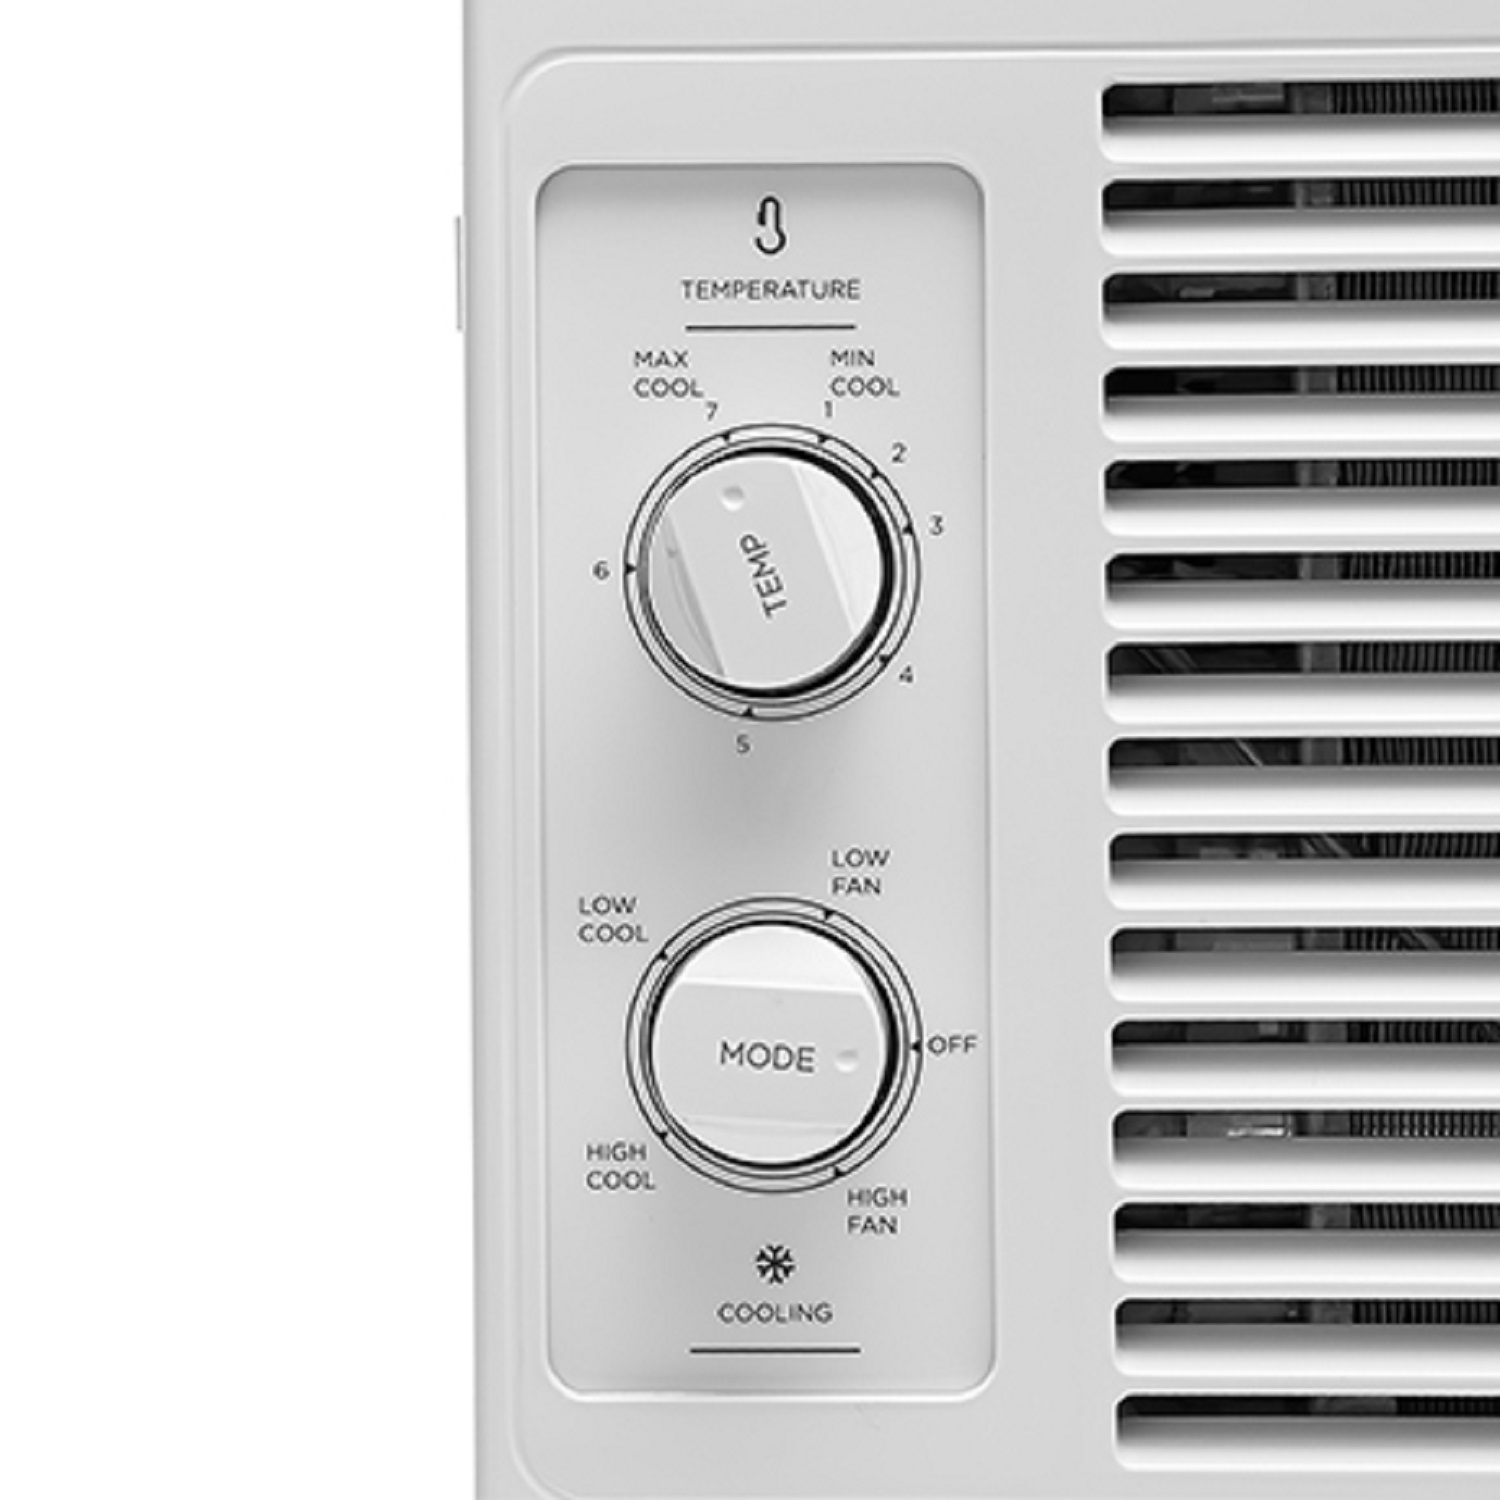 Midea 5,000 BTU 150 Sq Ft Mechanical Window Air Conditioner, White, MAW05M1WWT - image 8 of 17